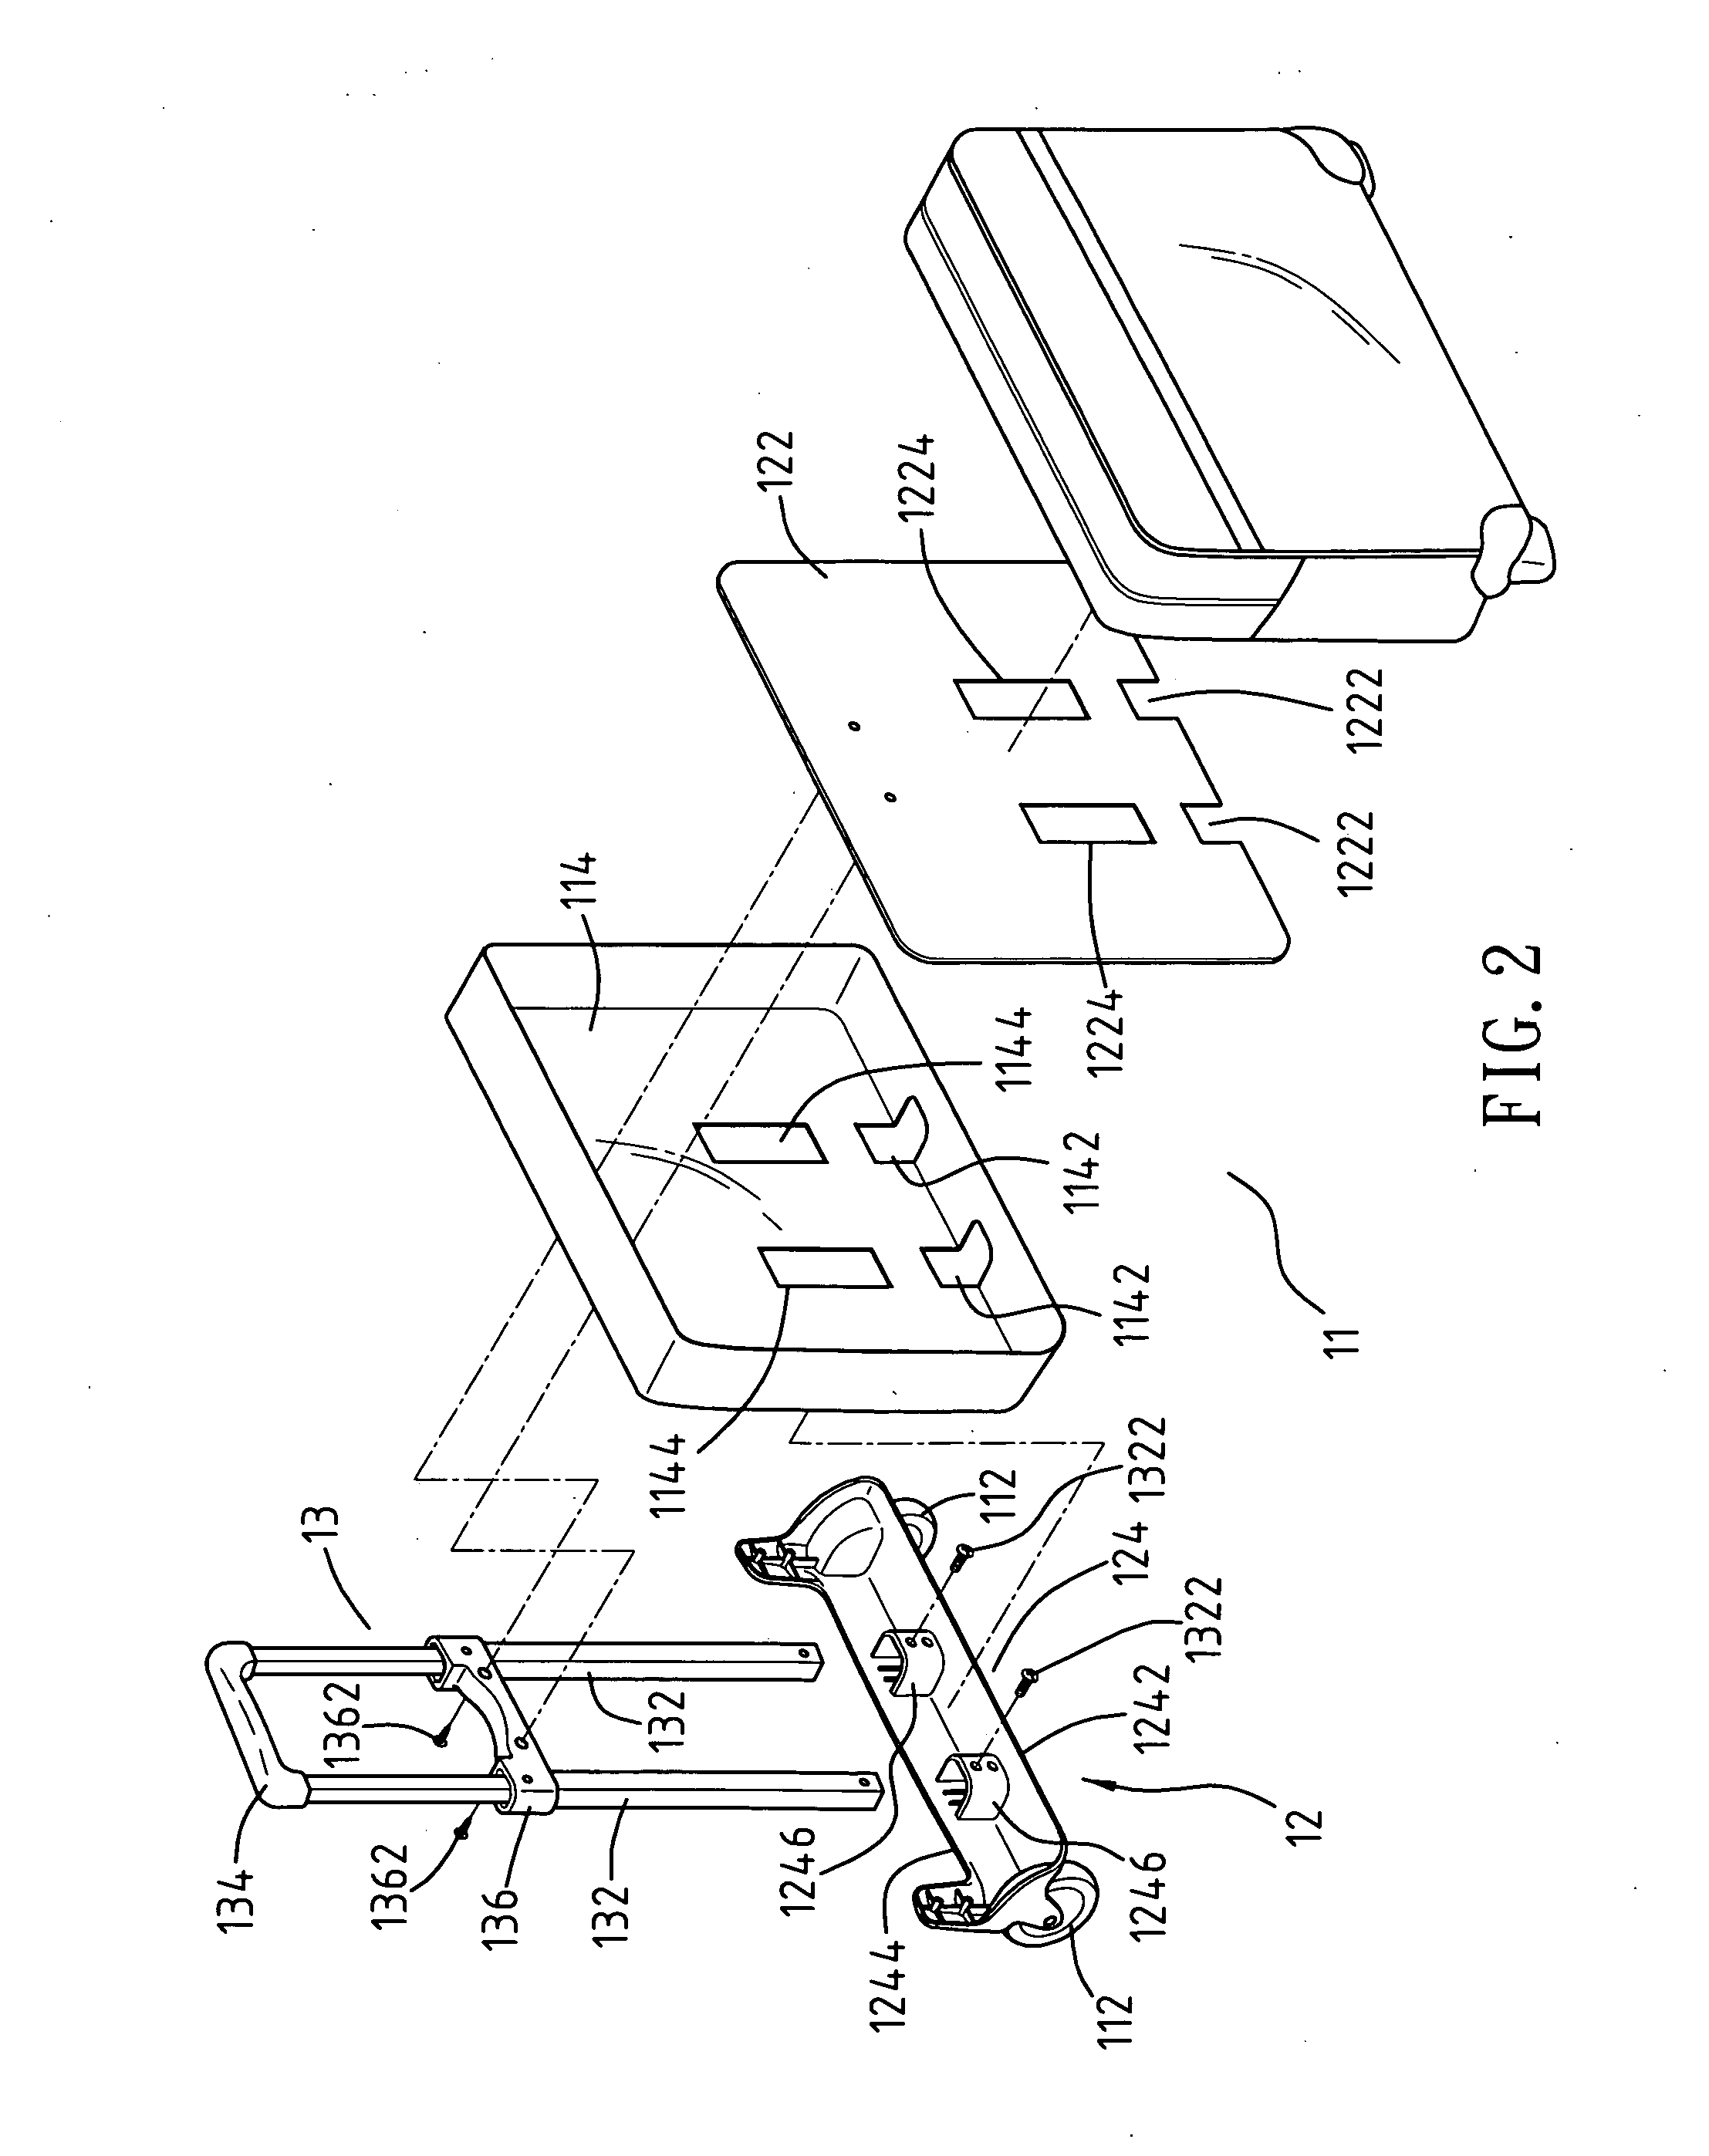 Suitcase with pull rod unit